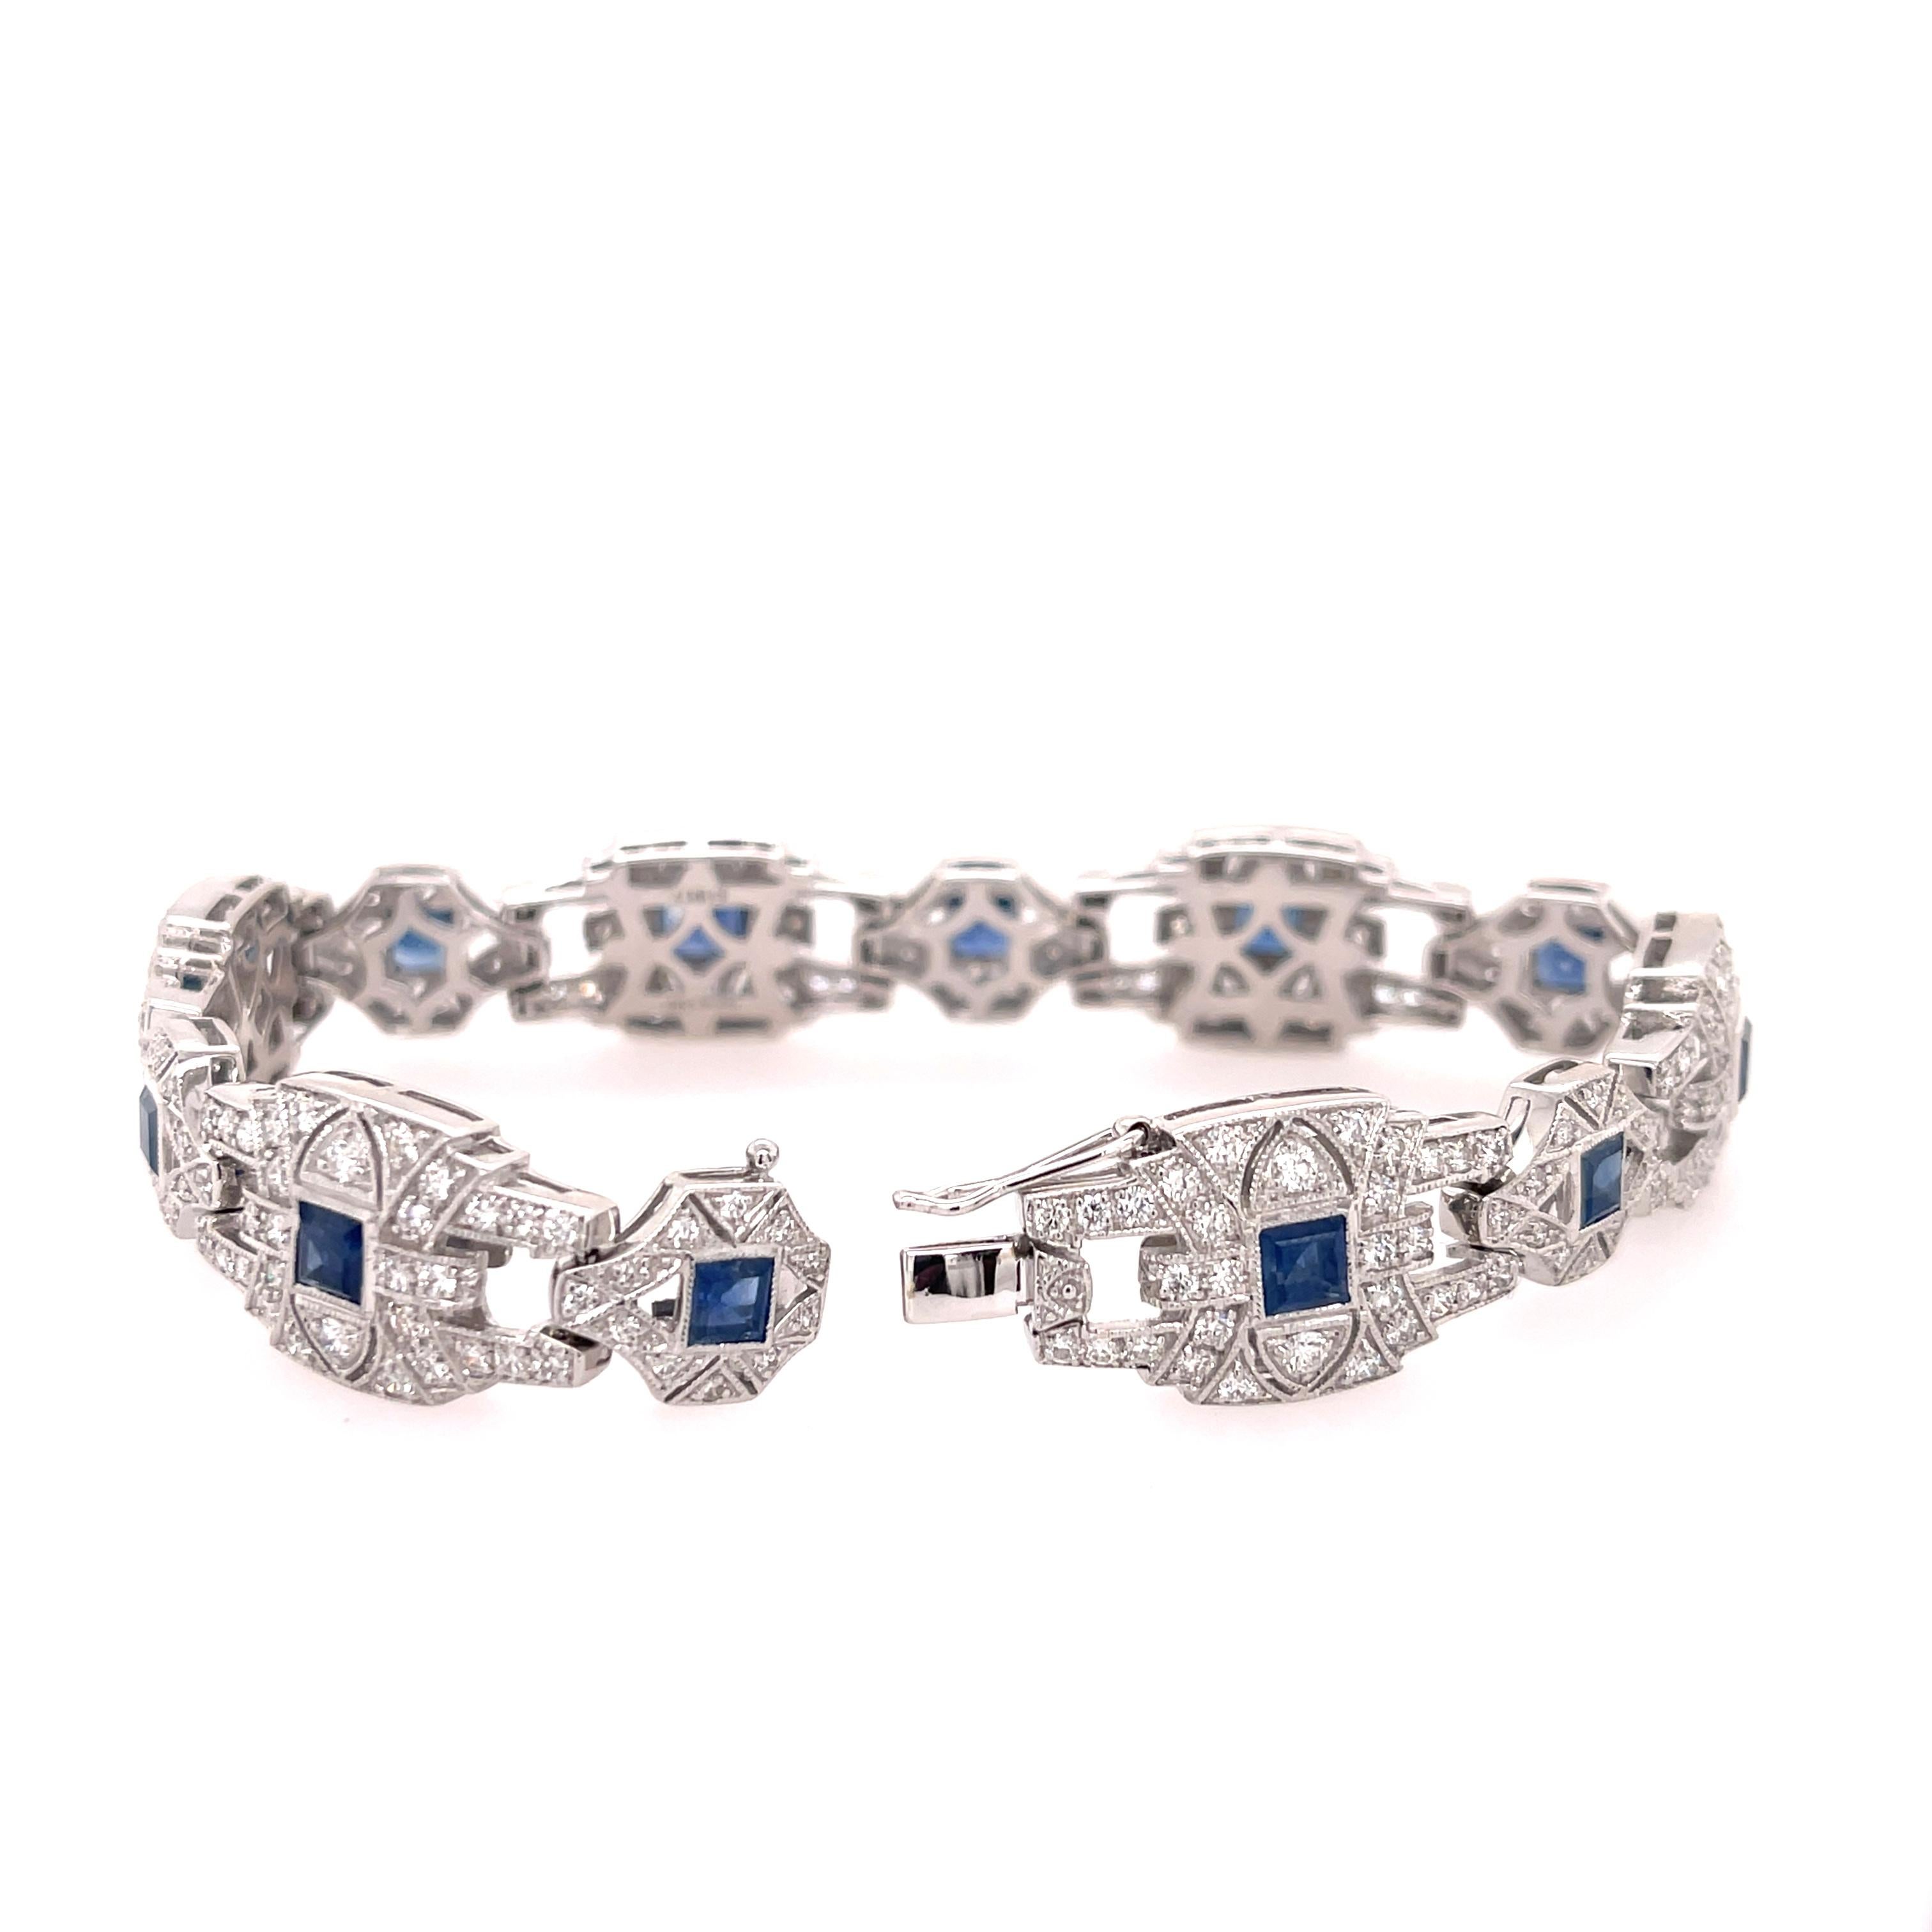 Art Deco style bracelet with sapphires and diamonds set in 14K white gold. The bracelet features 4ctw of princess cut sapphires and 3.78ctw if diamonds. 